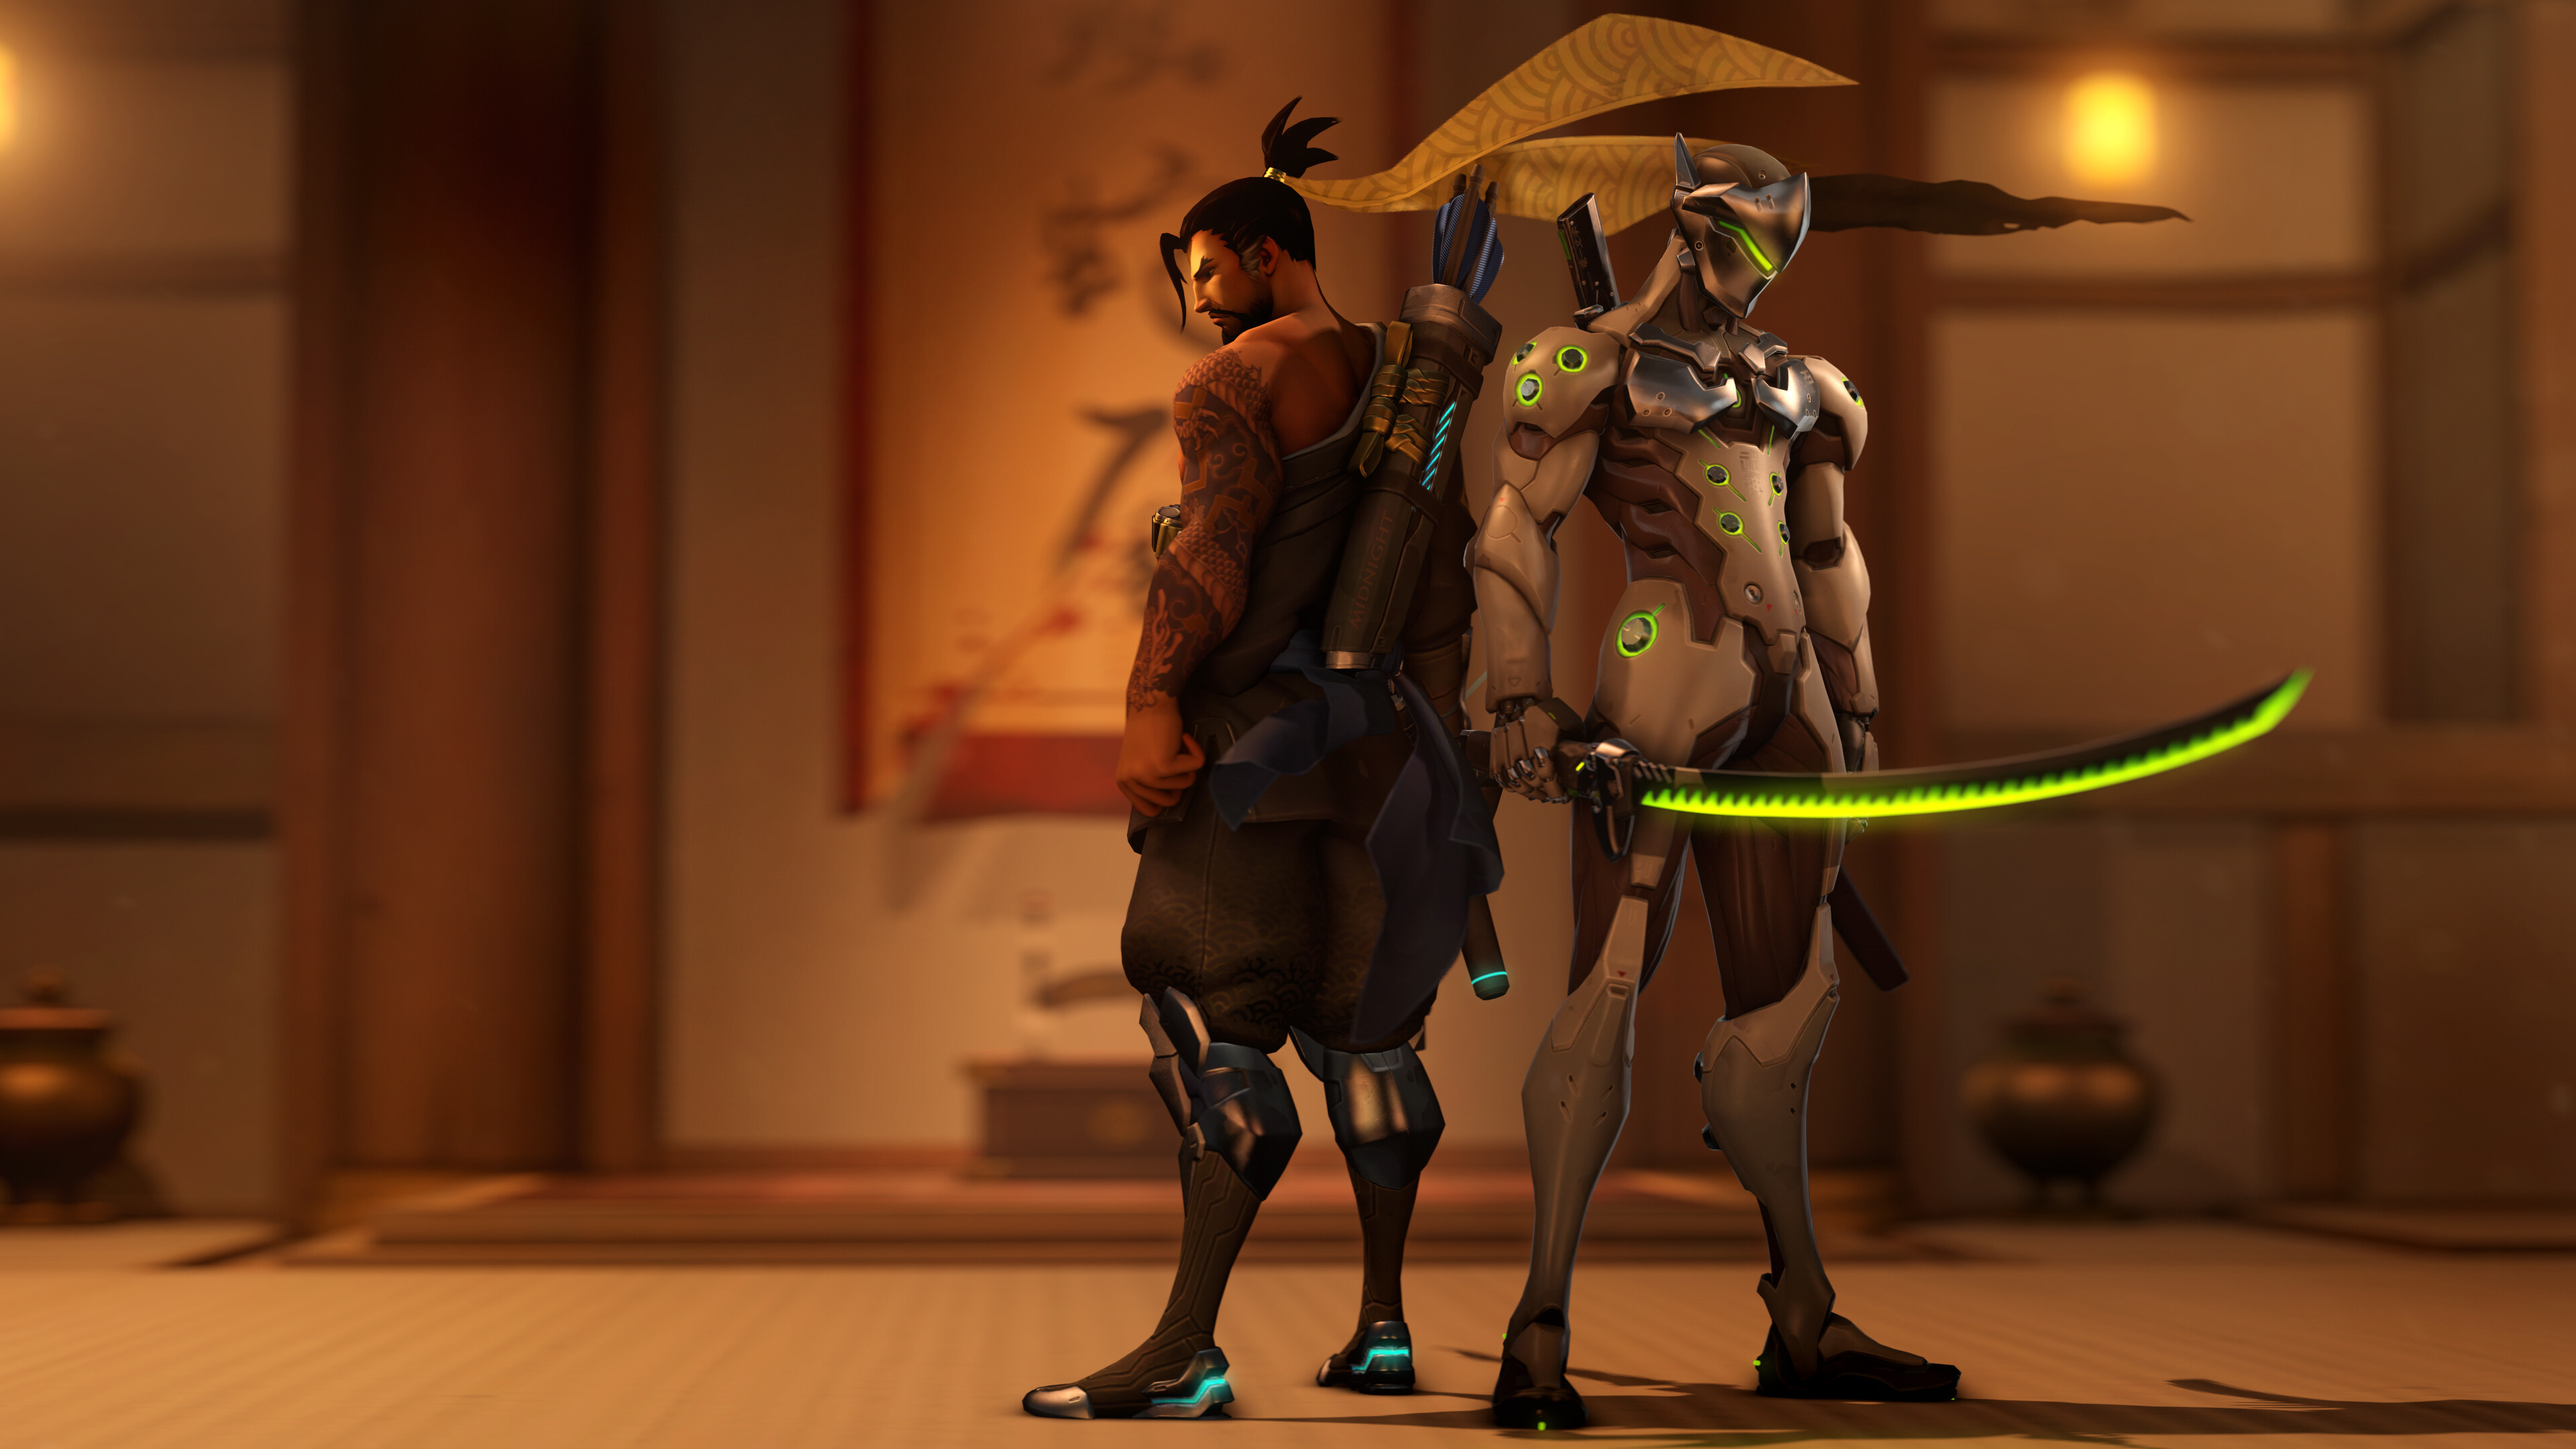 Genji: Hanzo, Games, Swift Strike allows Sparrow to engage or move between targets efficiently. 3840x2160 4K Background.